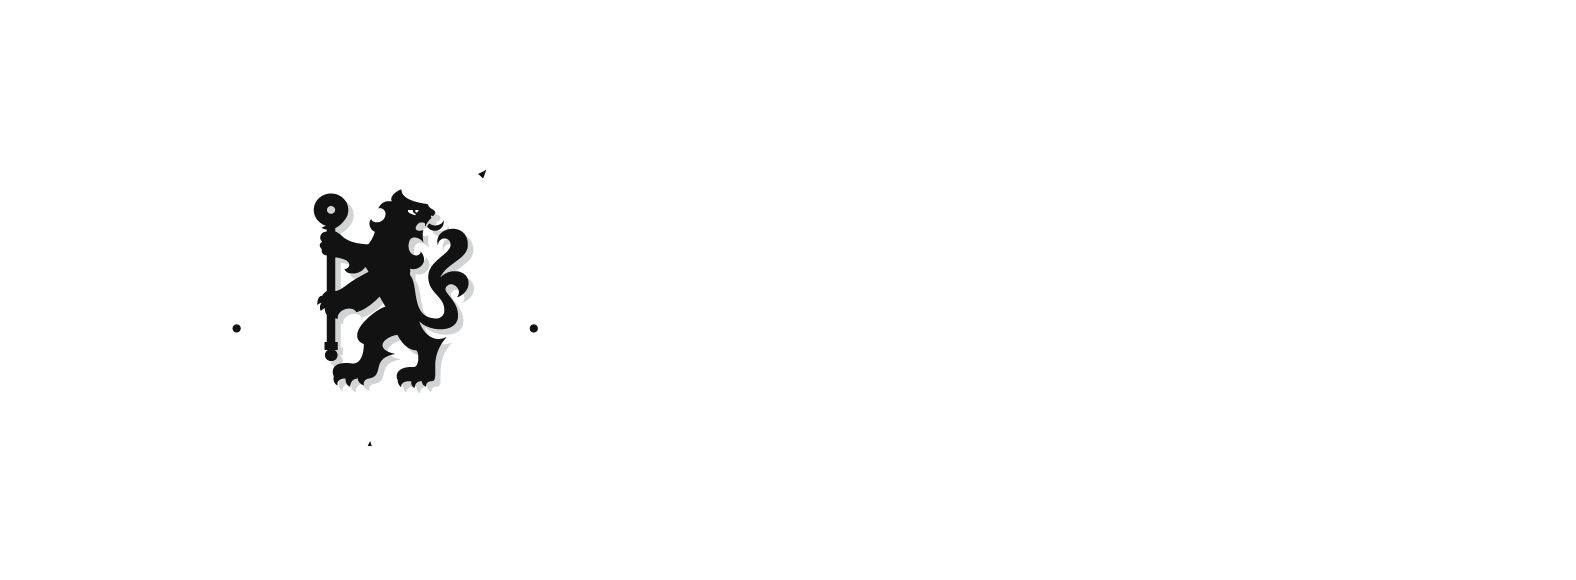 Sector-Page-Chelsea-SailGP